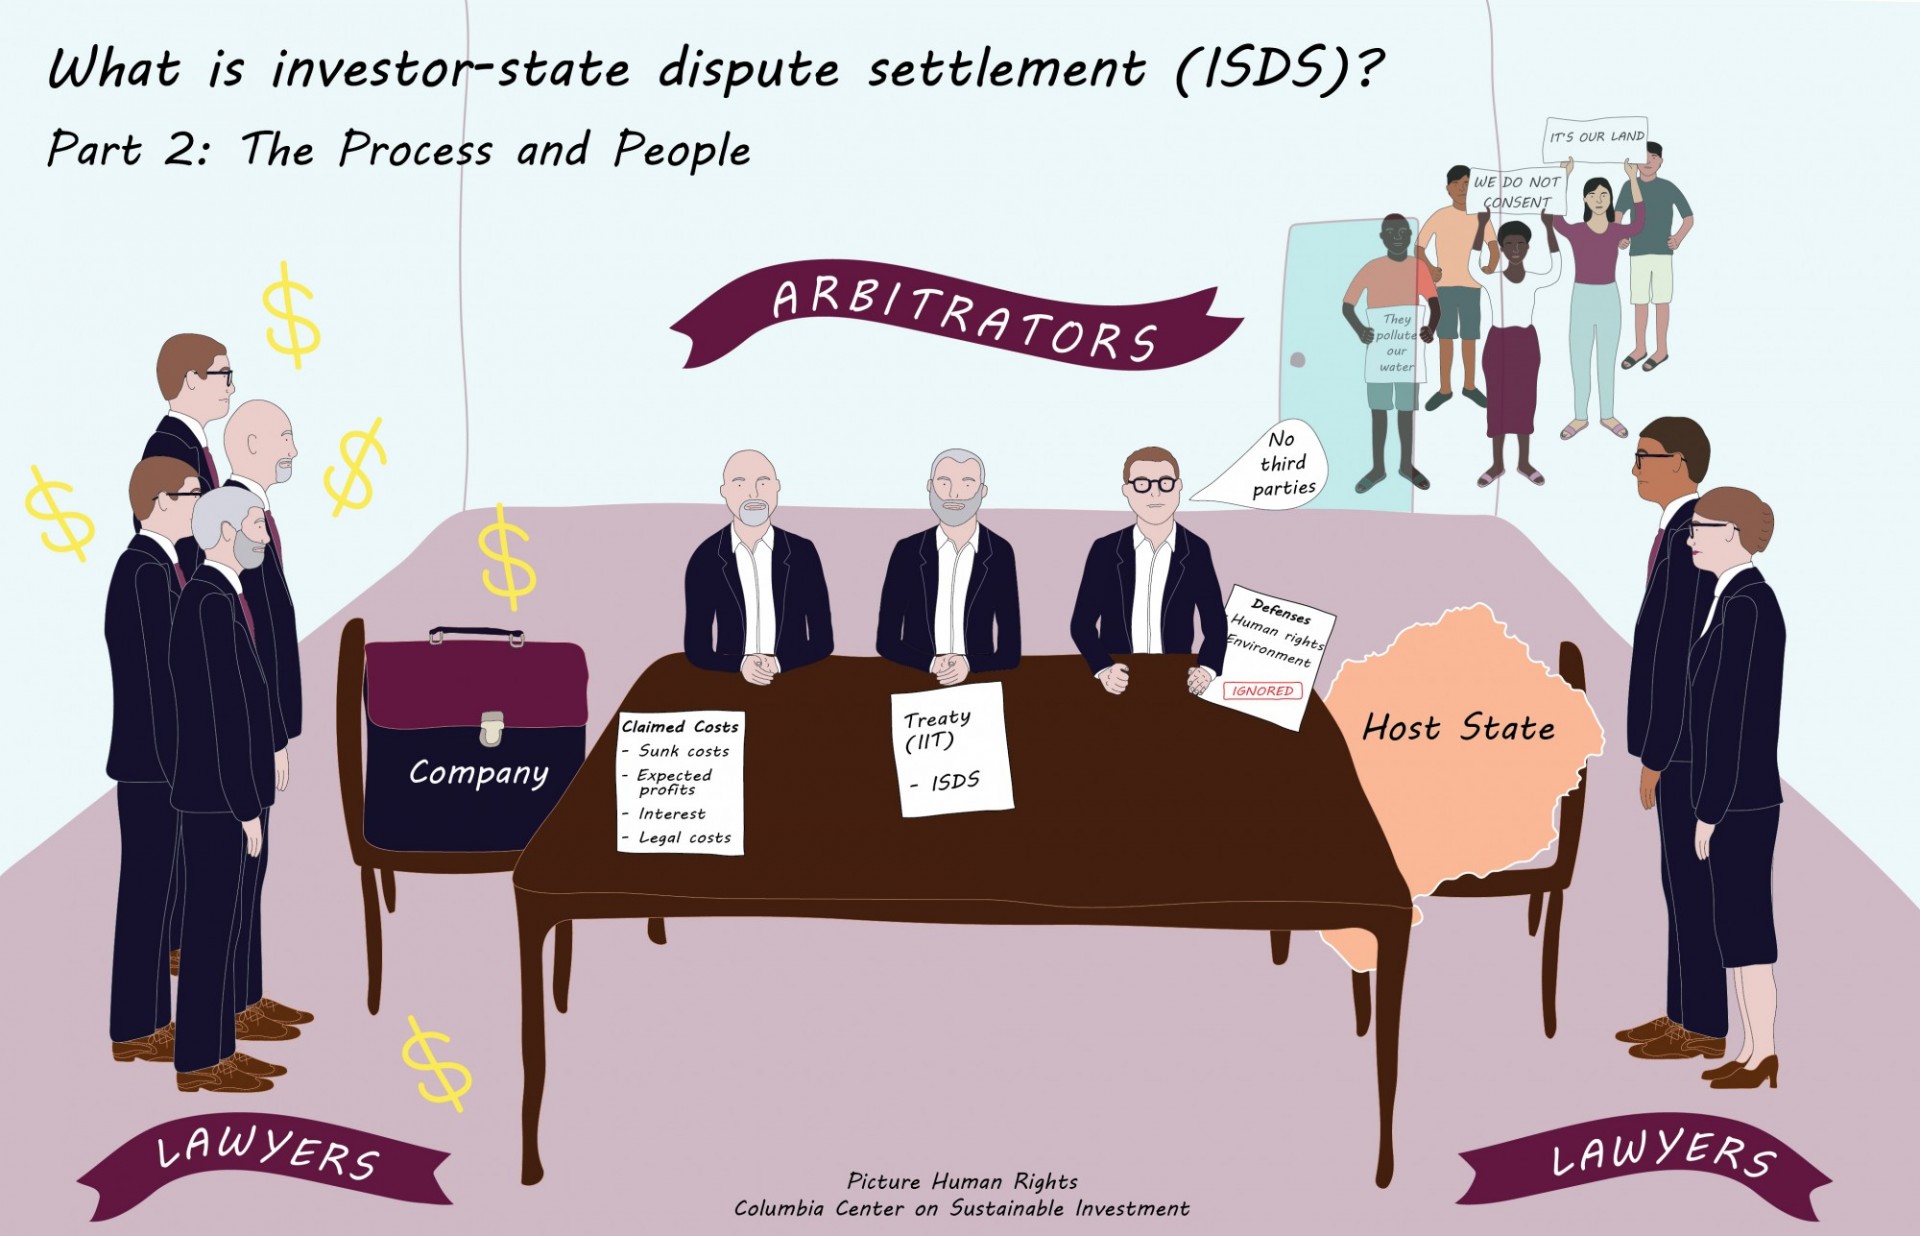 Graphic depicting table of three men labeled arbitrators holding three papers reading "Claimed Costs: sunk costs, expected profits, interest, legal costs," "Treaty (IIT): ISDS," and "Defenses: Human rights Environment (ignored)." The table is in between two groups of lawyers on either side; One side is the company and the other is the host state. In the back, there are protestors holding signs reading "We do not consent"and "This is our land."